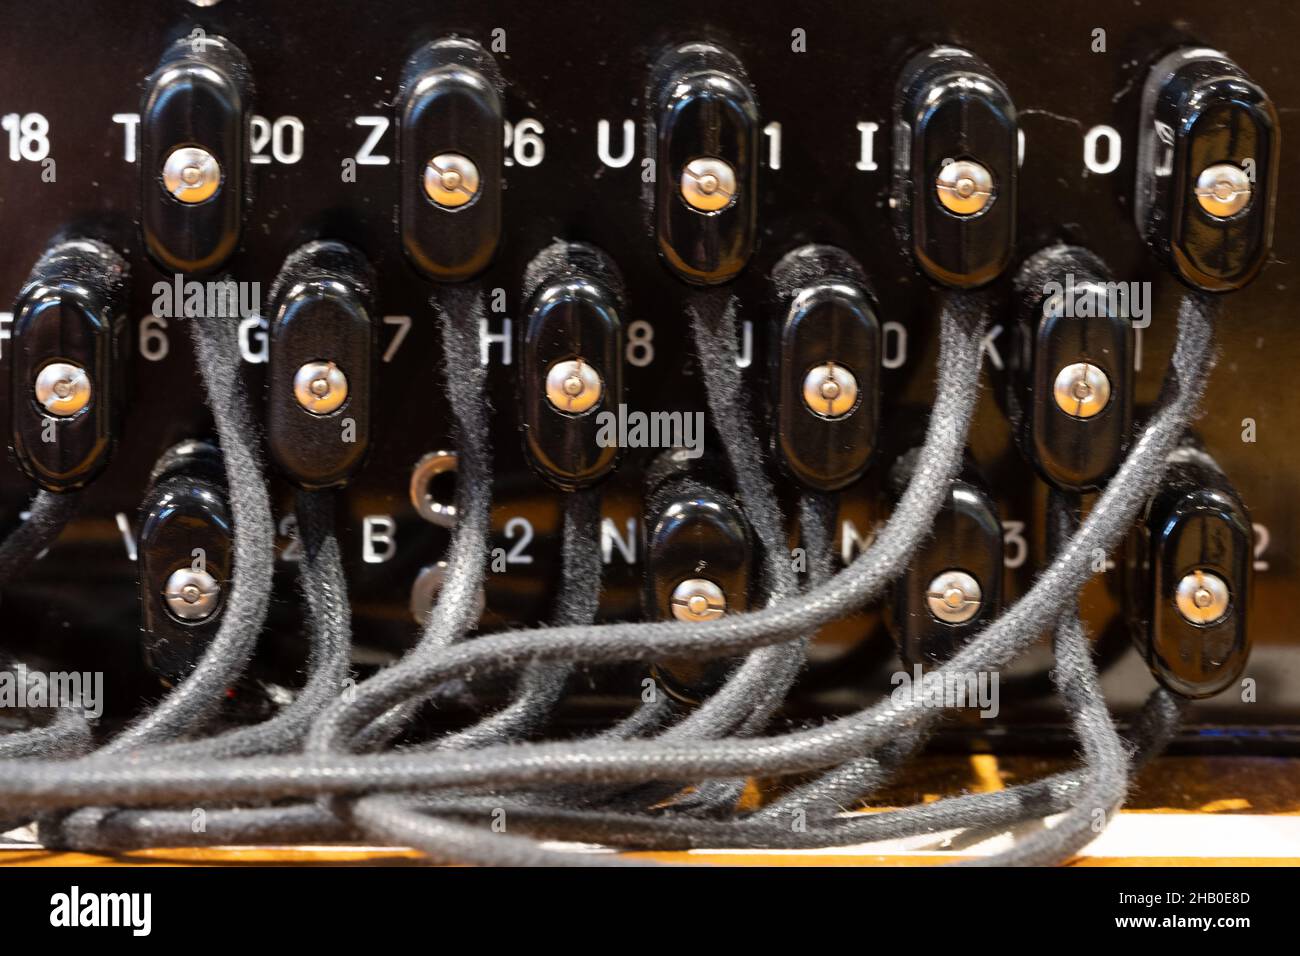 The plugboard from a German World War 2 'Enigma' encryption machine at Bletchley Park, Buckinghamshire. Stock Photo